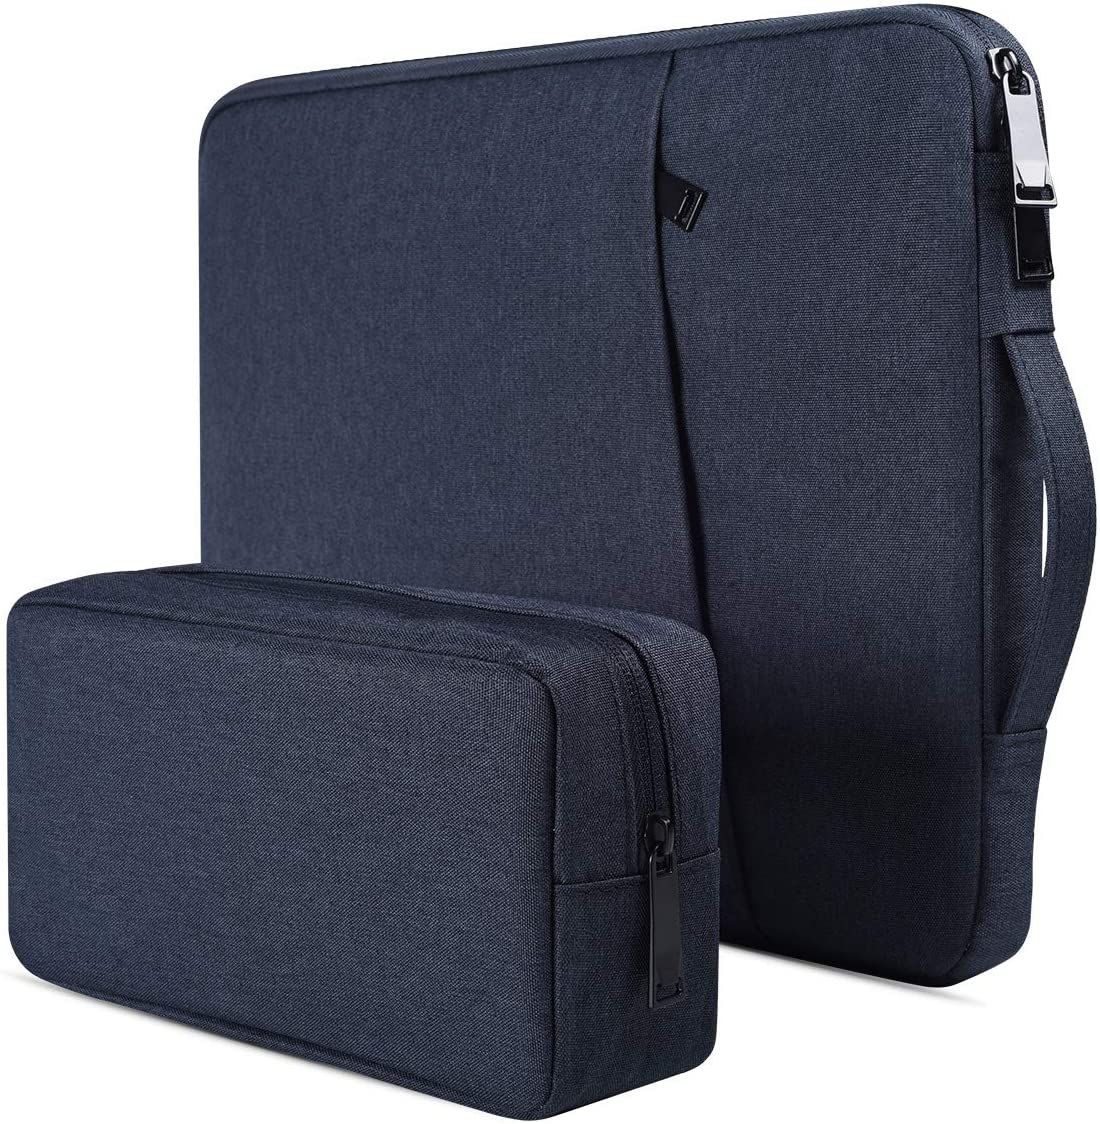 If you plan to carry accessories with your laptop, this sleeve is different in that it gives you a separate pouch for accessories.  The laptop sleeve itself offers solid, water-resistant protection, and the bag may be an easier way to organize your stuff.